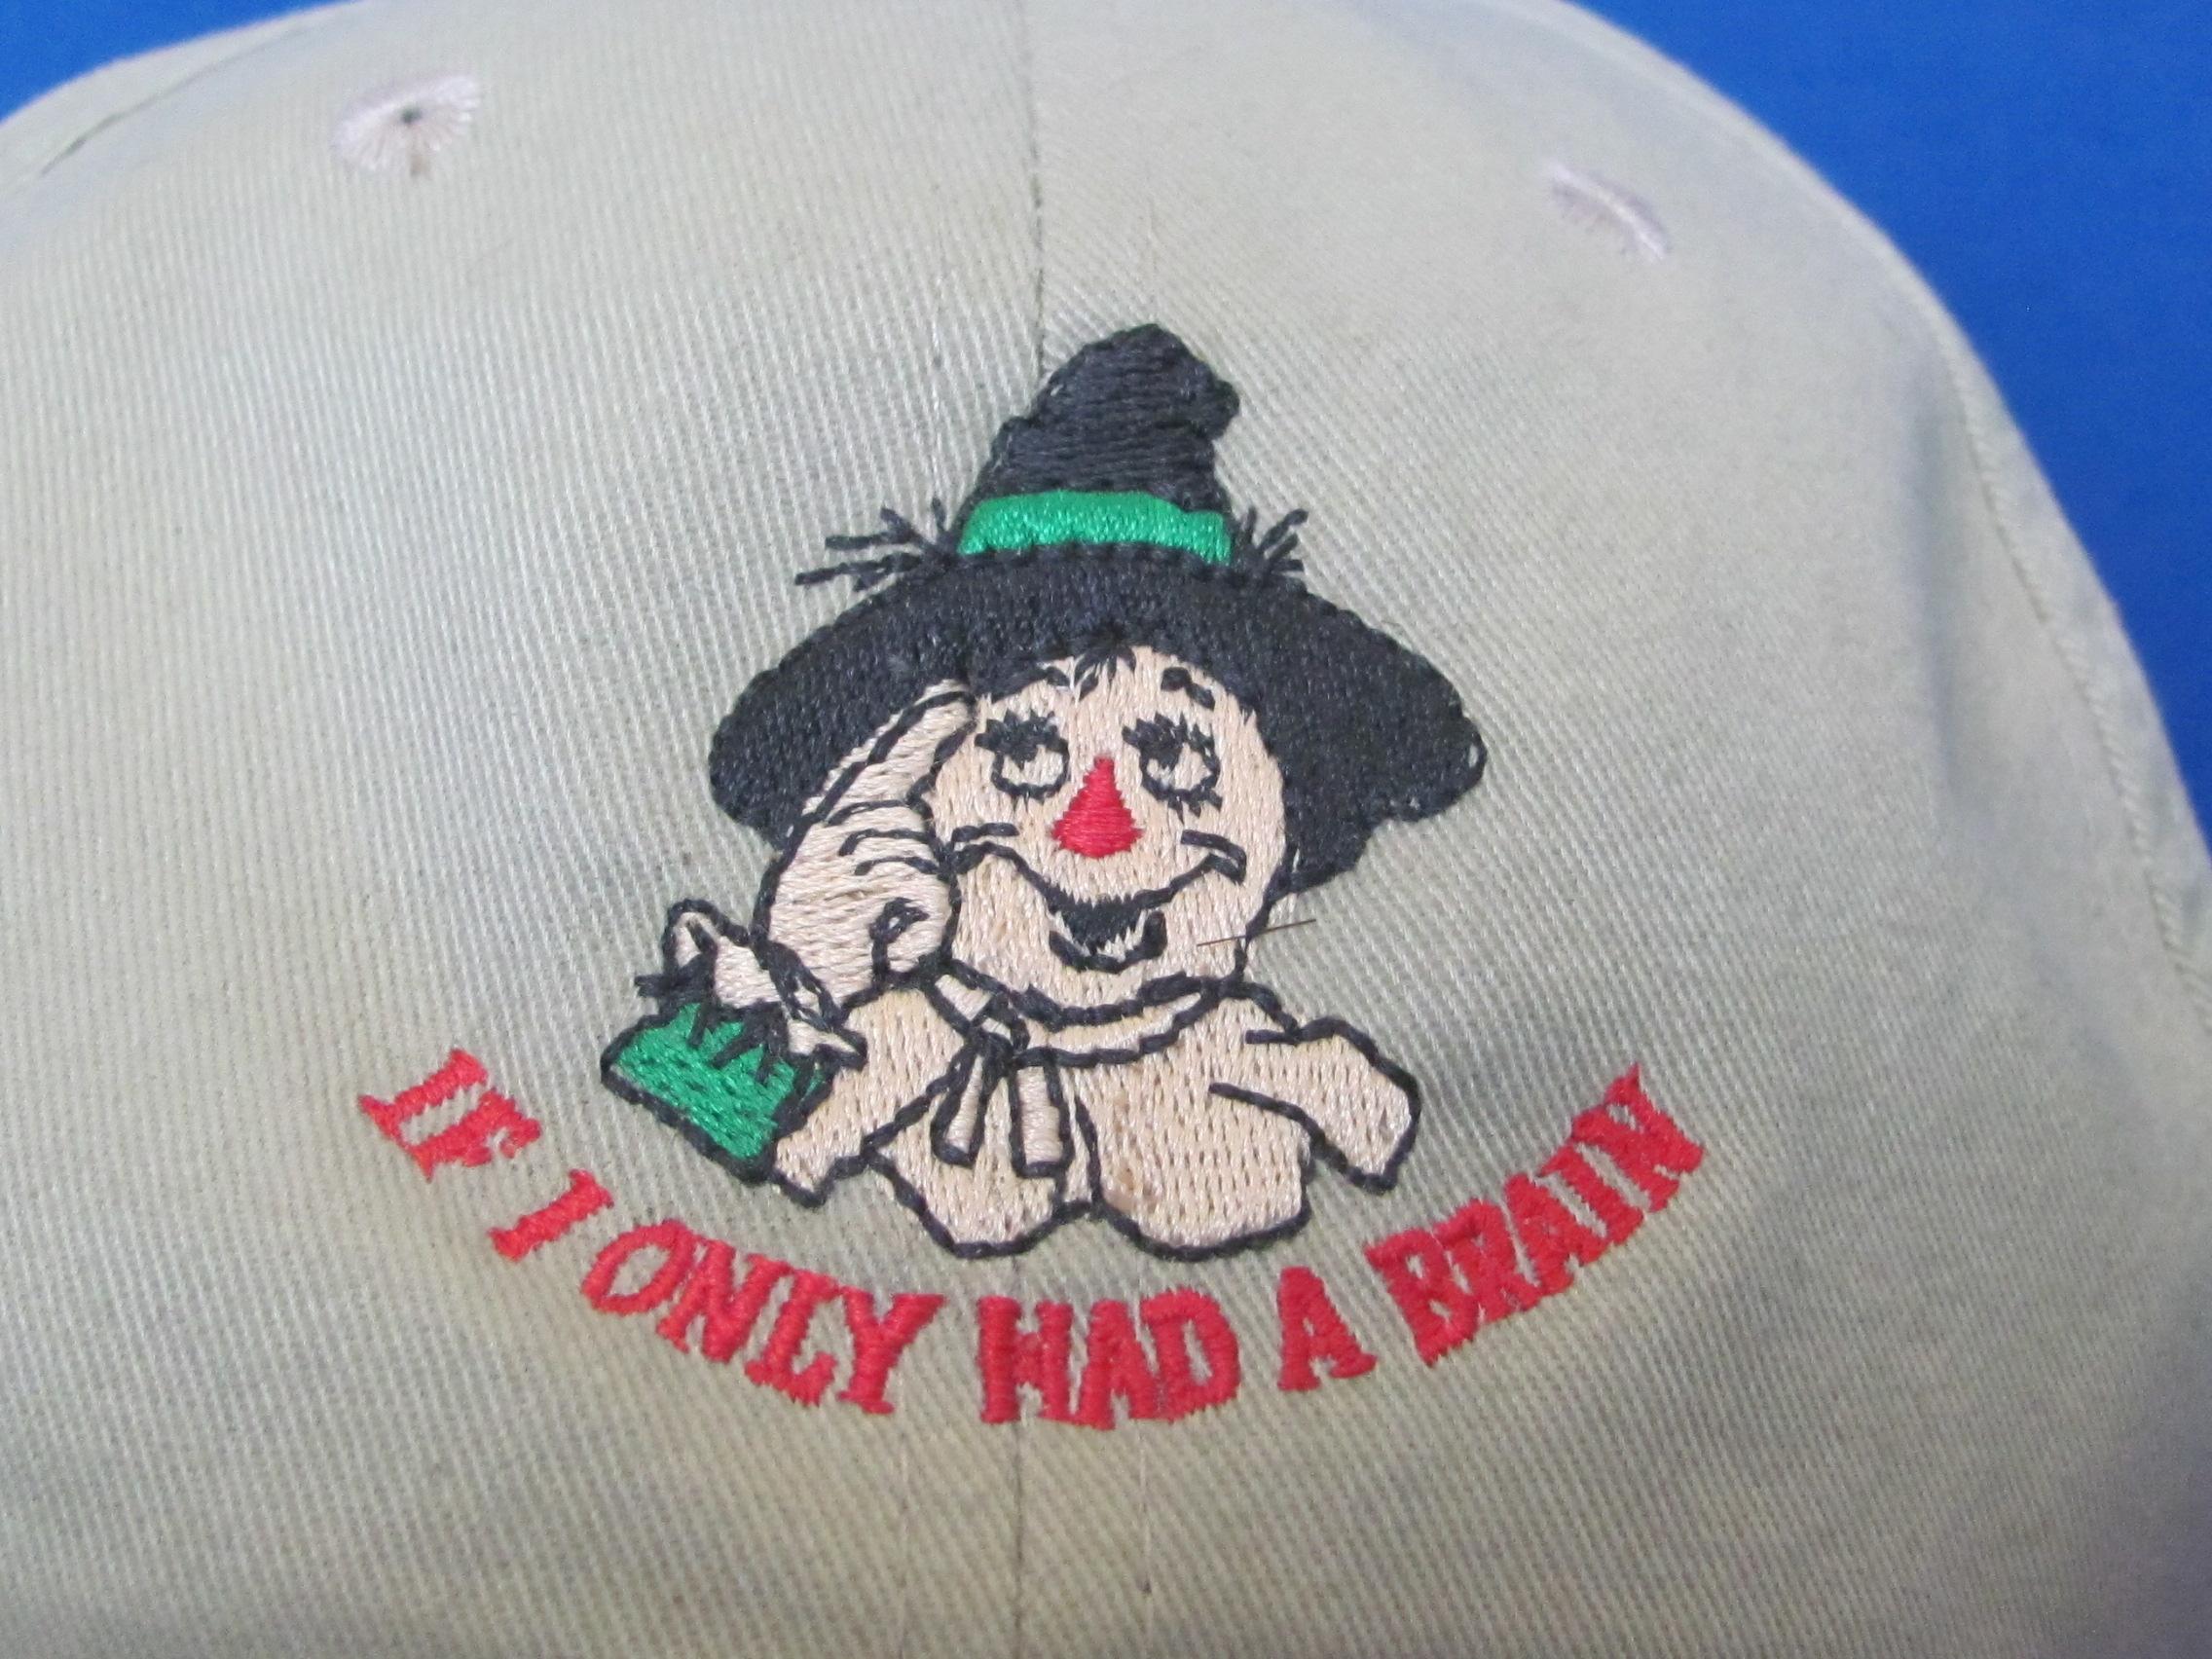 2 Caps: “If I only had a brain” & “A Grouchy German is a Sour Kraut” - Good condition